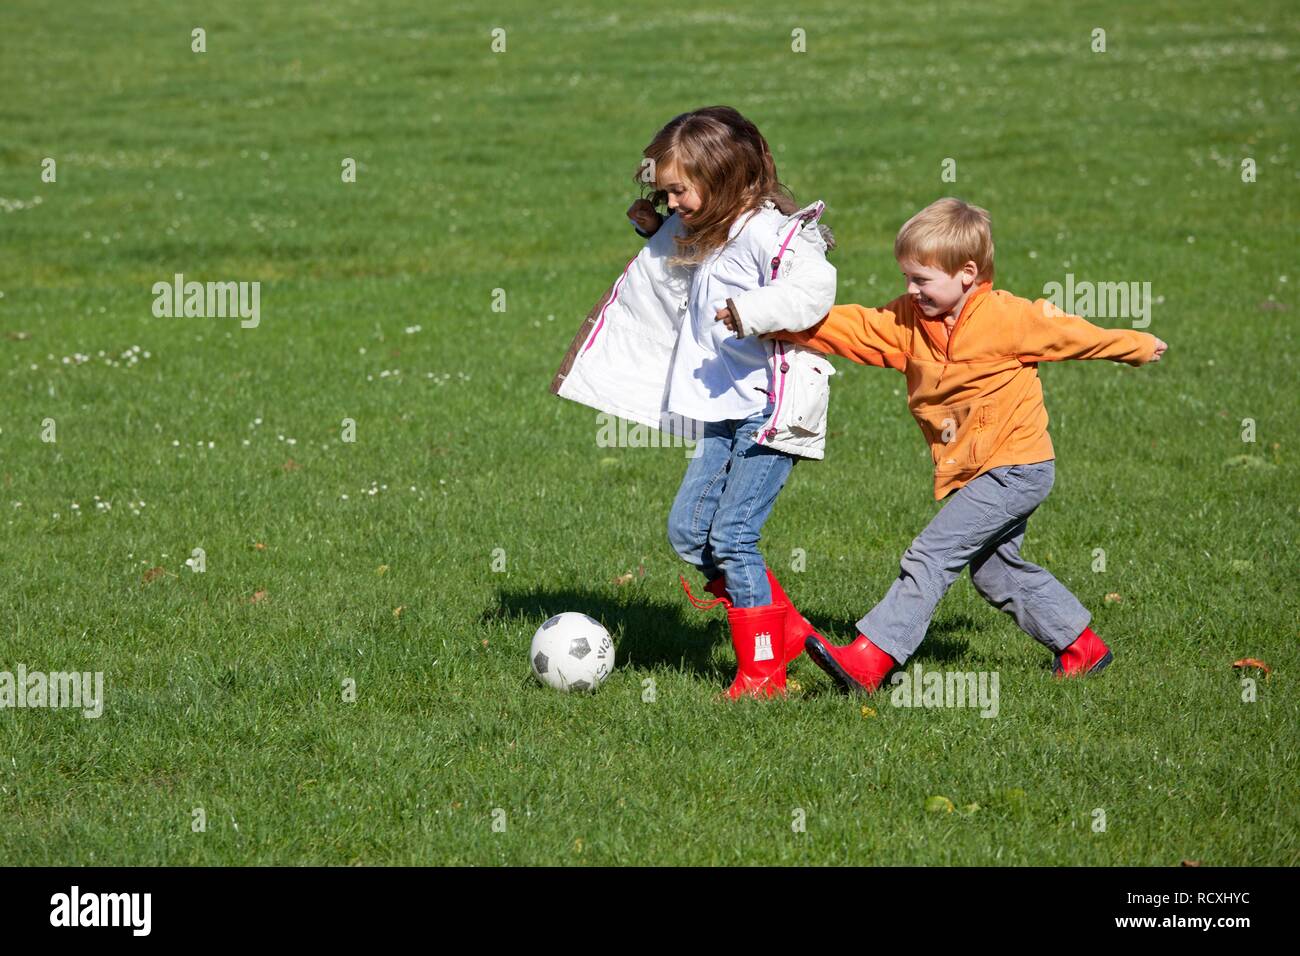 Girl and boy playing soccer Stock Photo